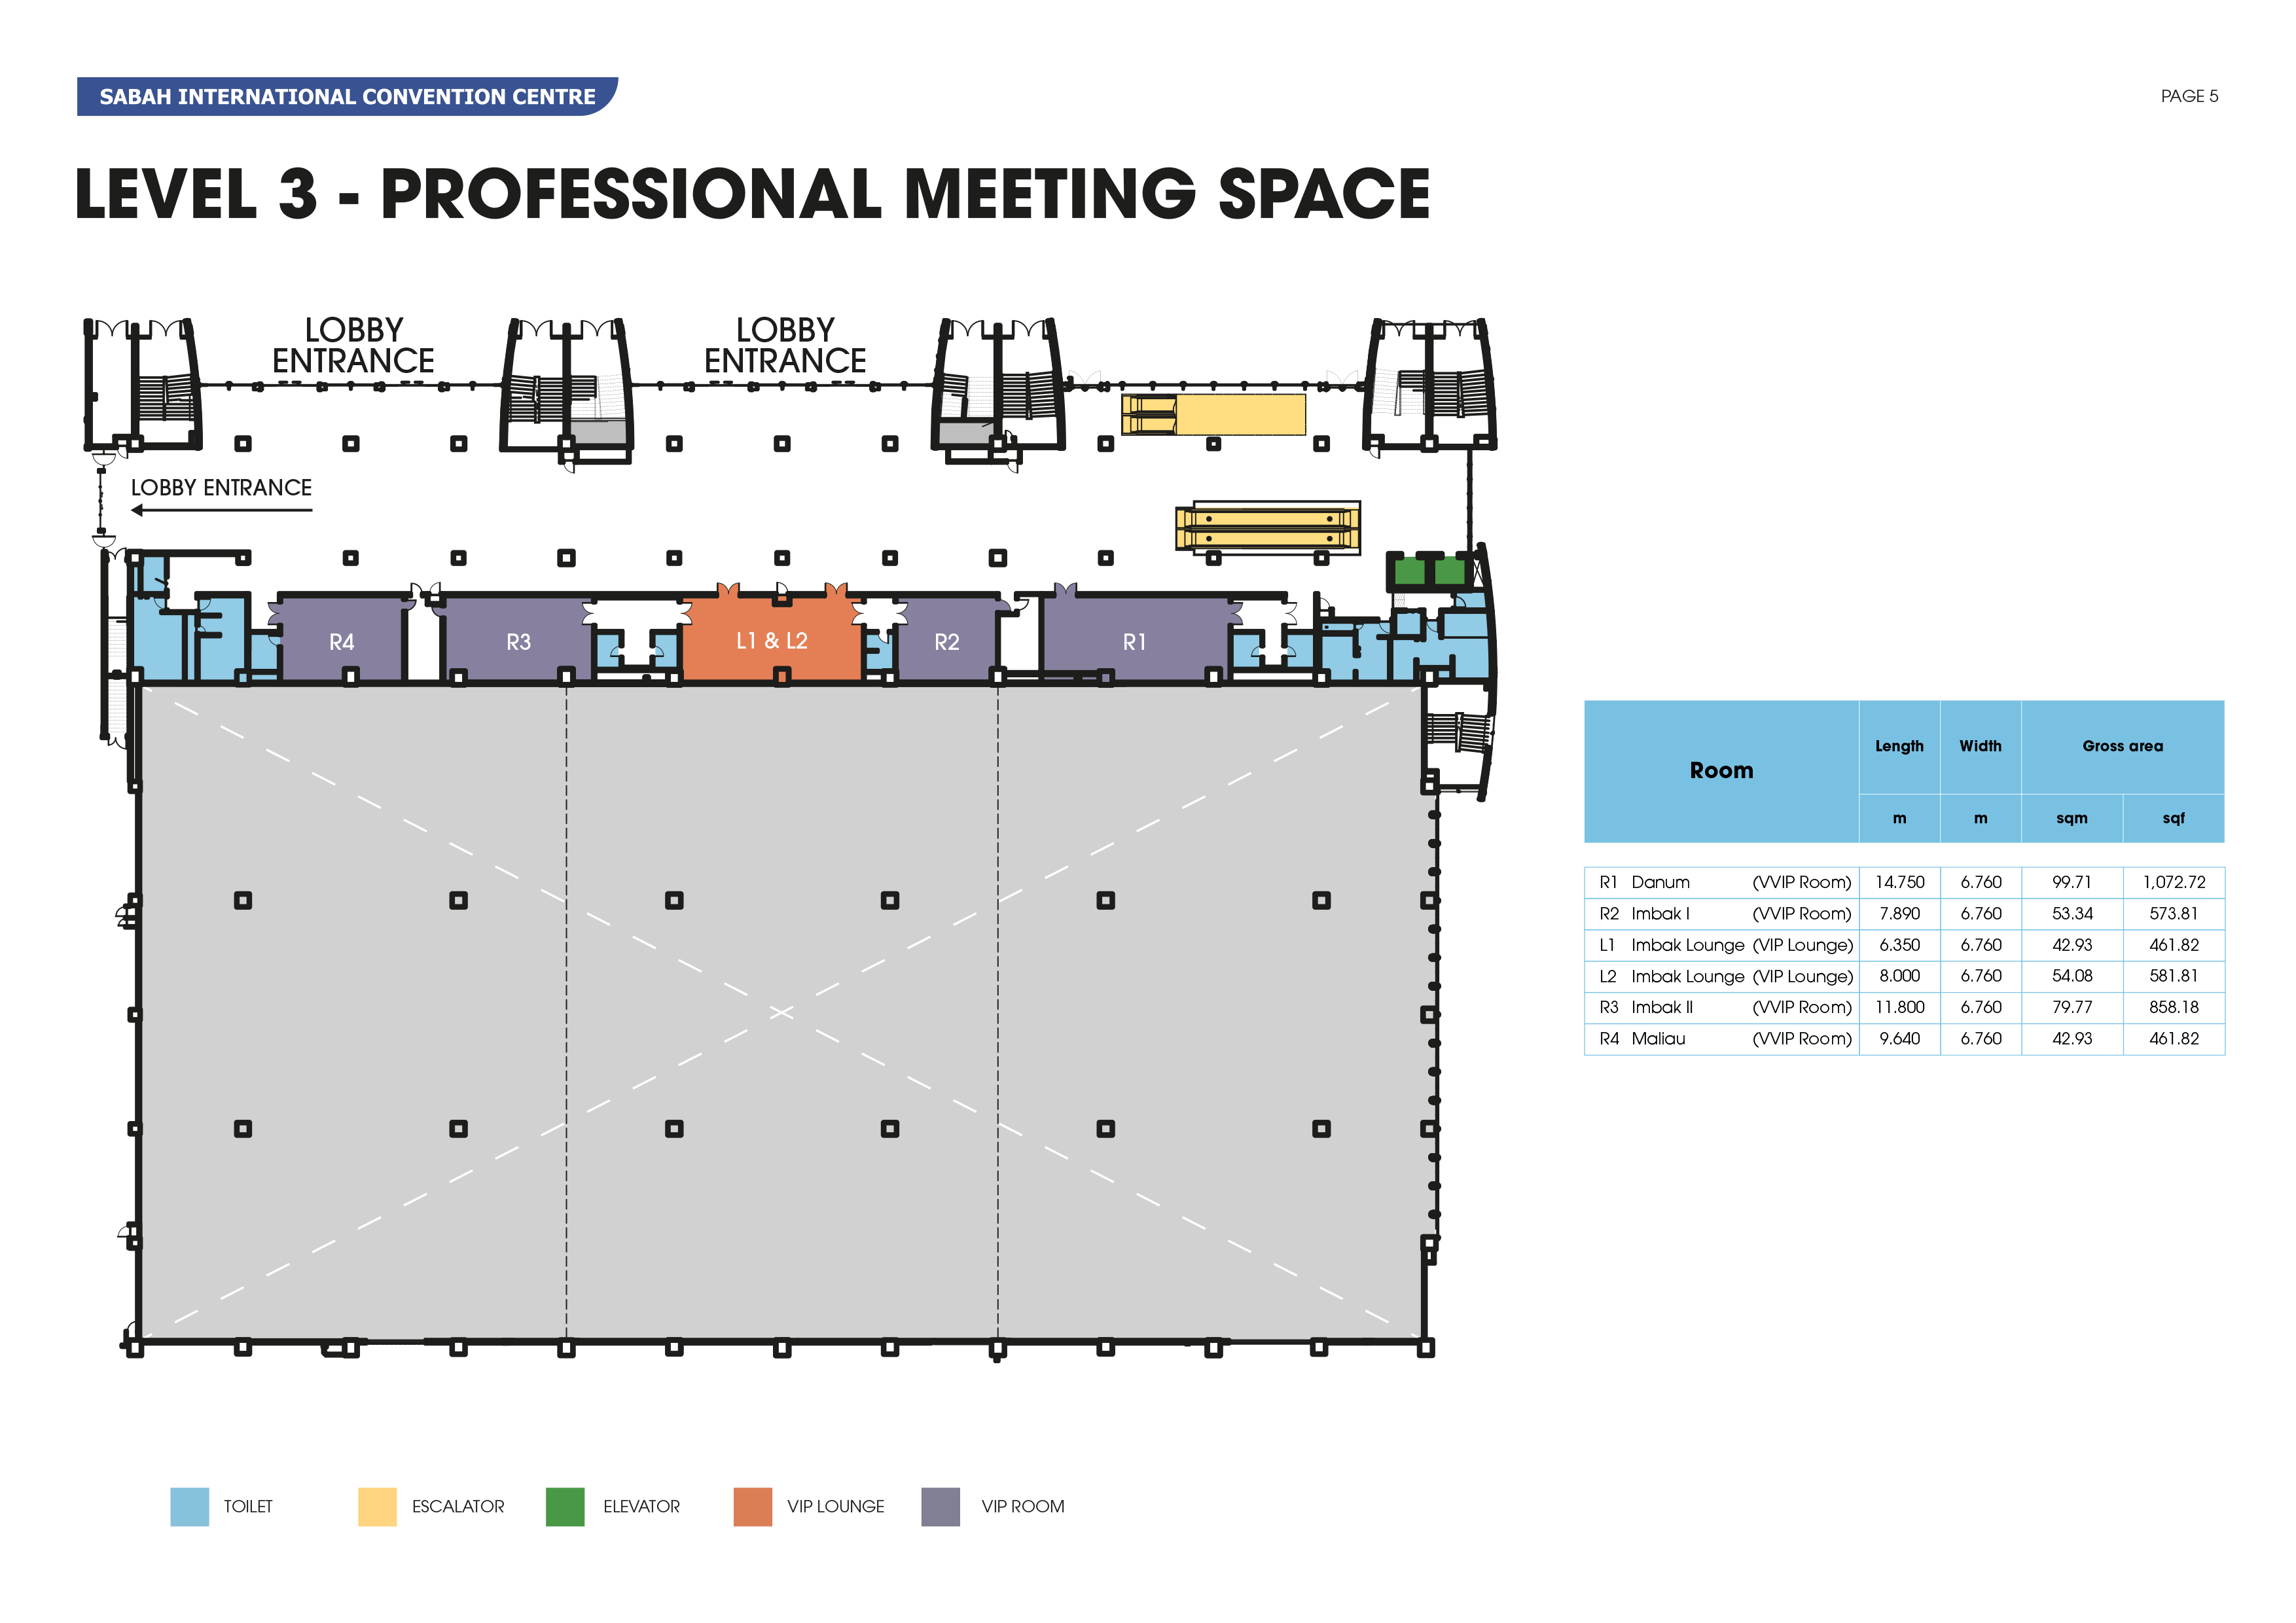 Level 3 - Professional Meeting Space